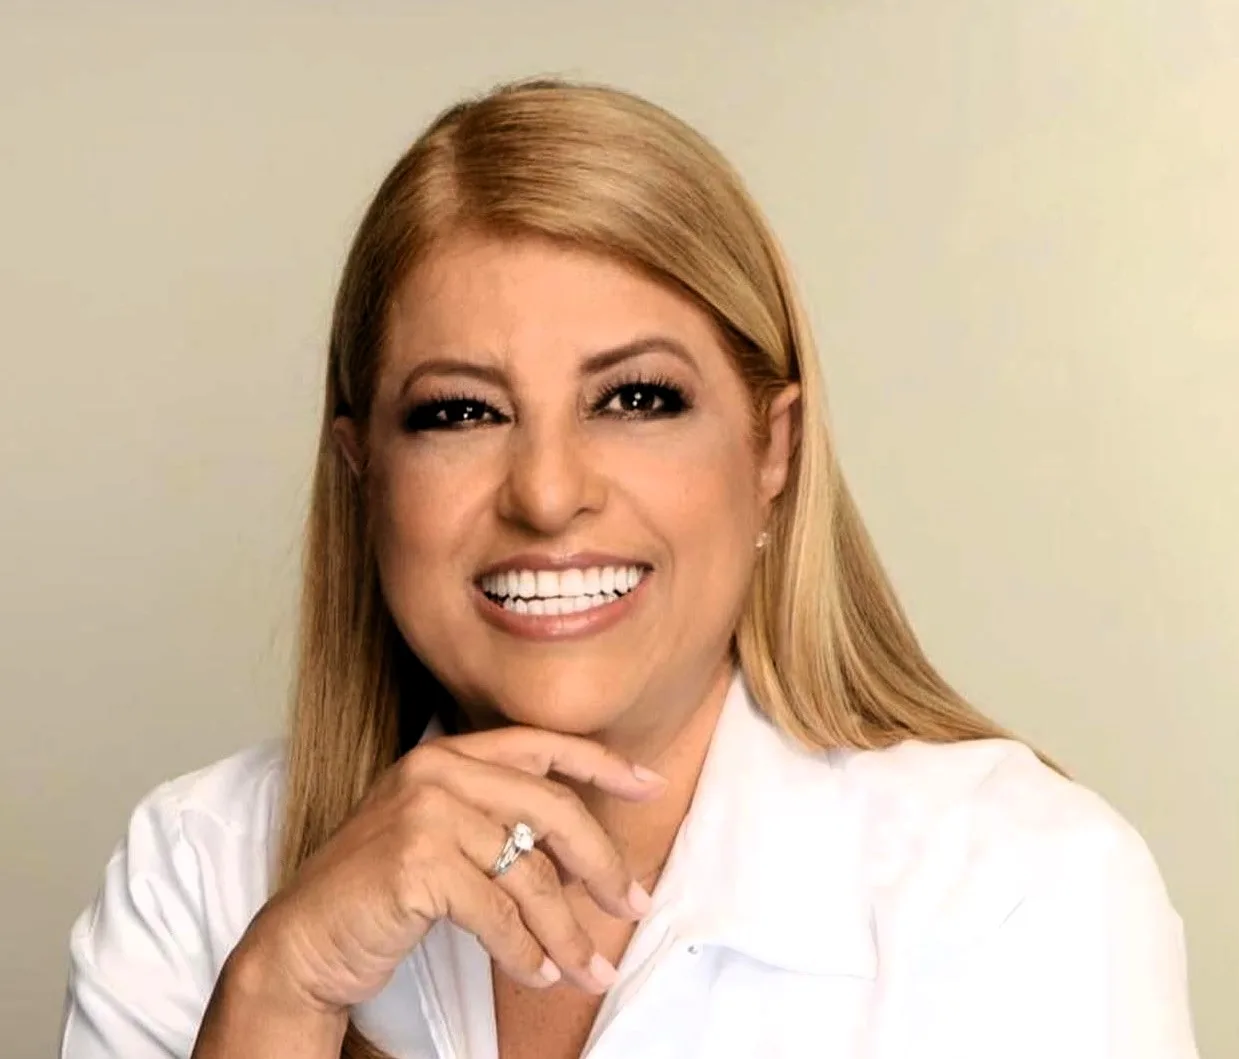 Gloria Hincapié, a beauty therapist known for her Hincapié Technique and body contour spas, has died after battling cancer for the second time. Hincapié had a celebrity clientele and developed a natural body contouring technique and a line of pineapple-based beauty products. She passed away in Los Angeles at the age of 63.